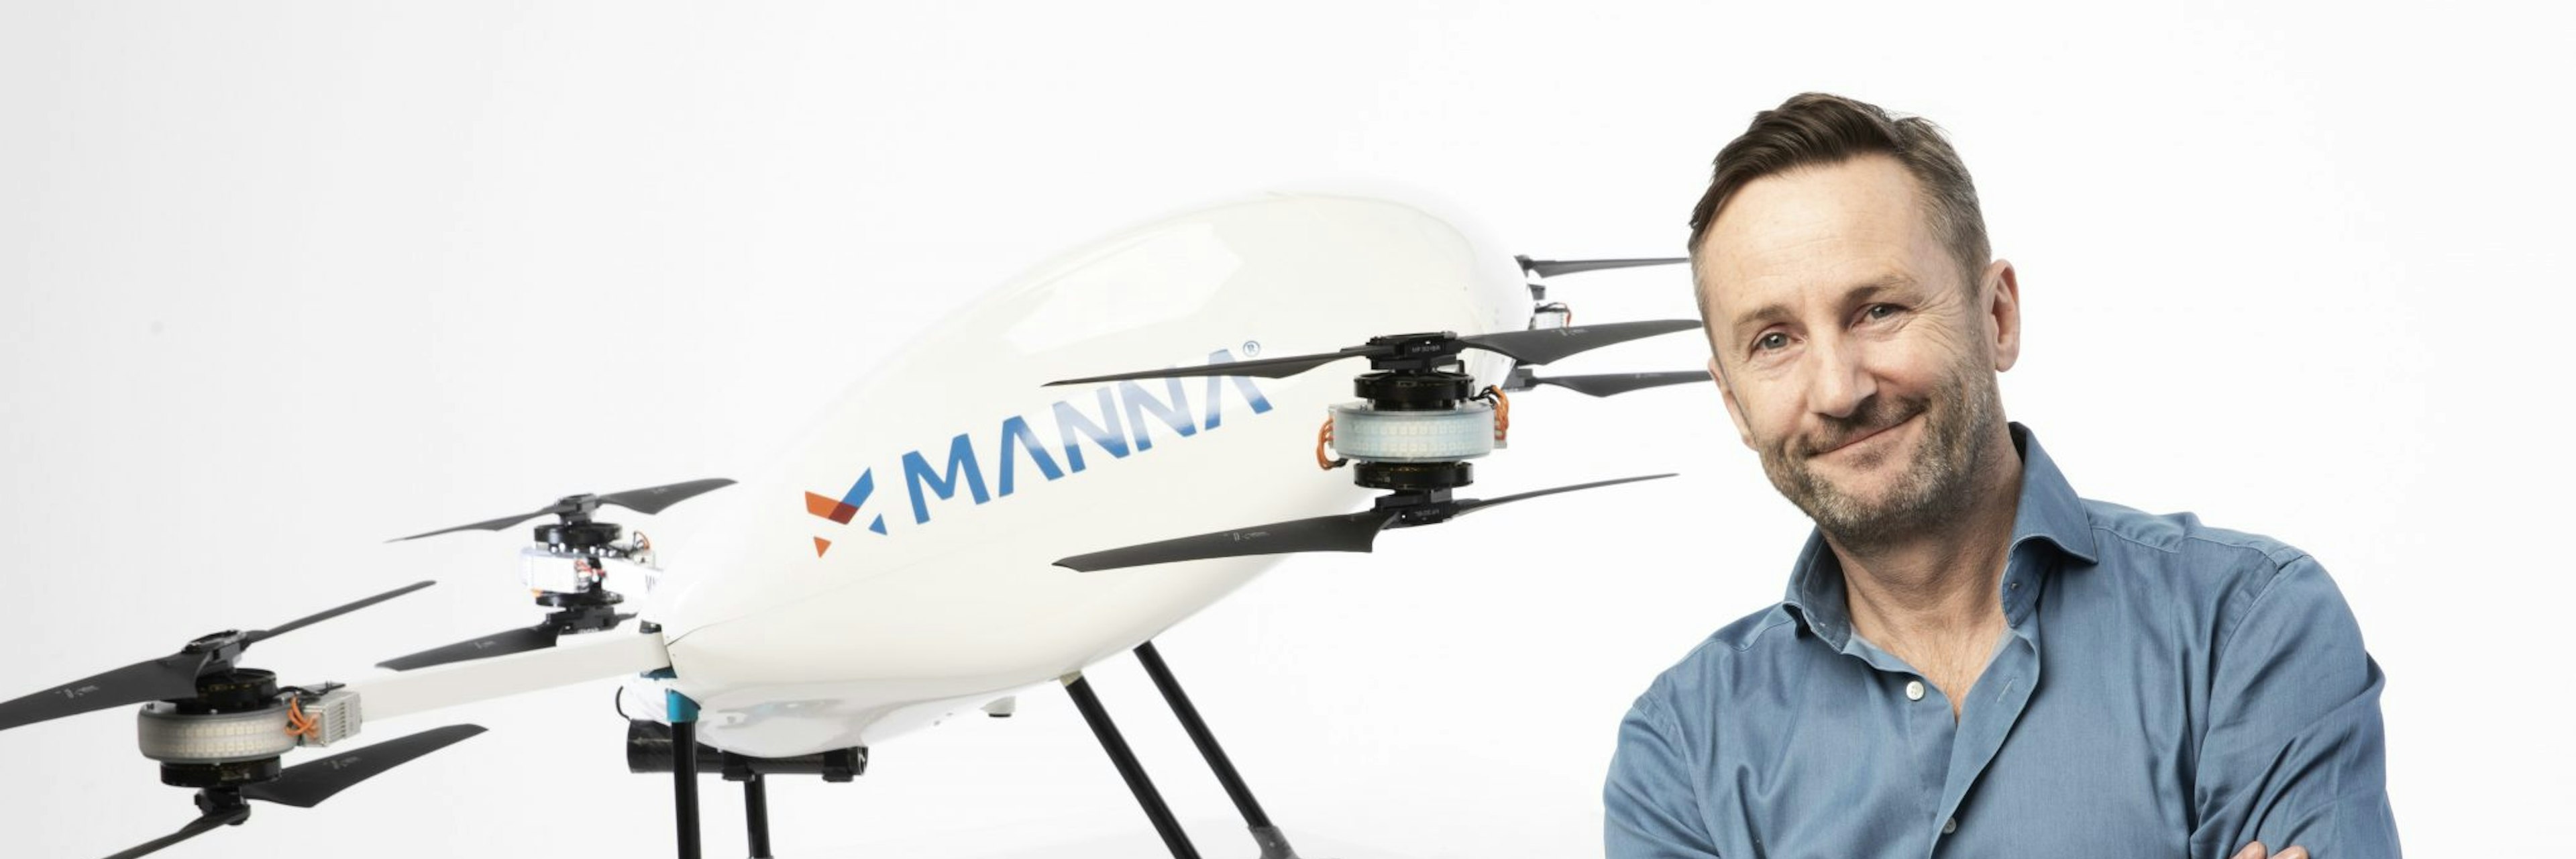 Manna founder and CEO Bobby Healy in front of a Manna drone